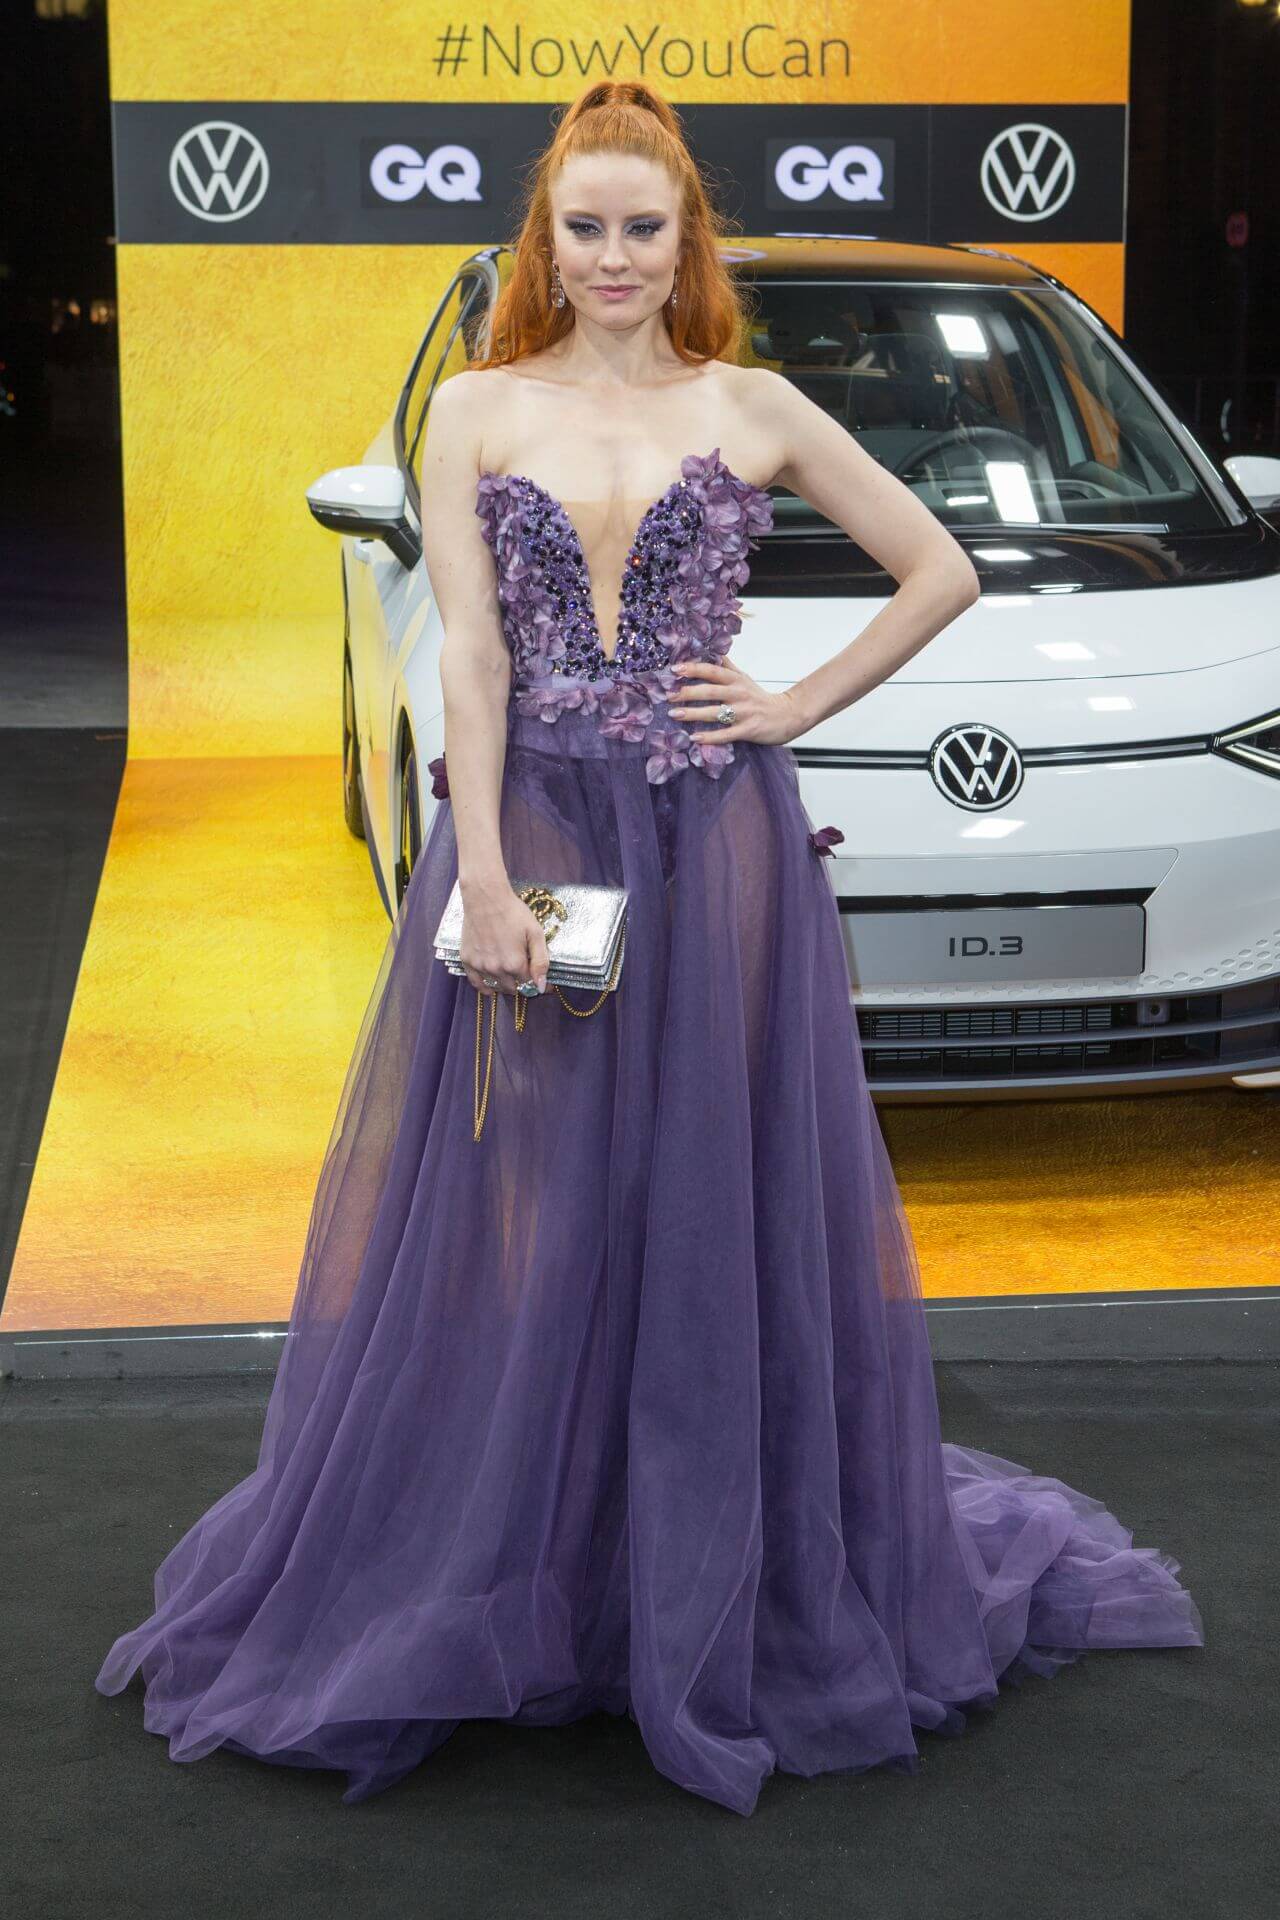 Barbara Meier In Purple Sheering With Floral Design Strapless Long Gown At GQ Men of the Year Awards in Berlin